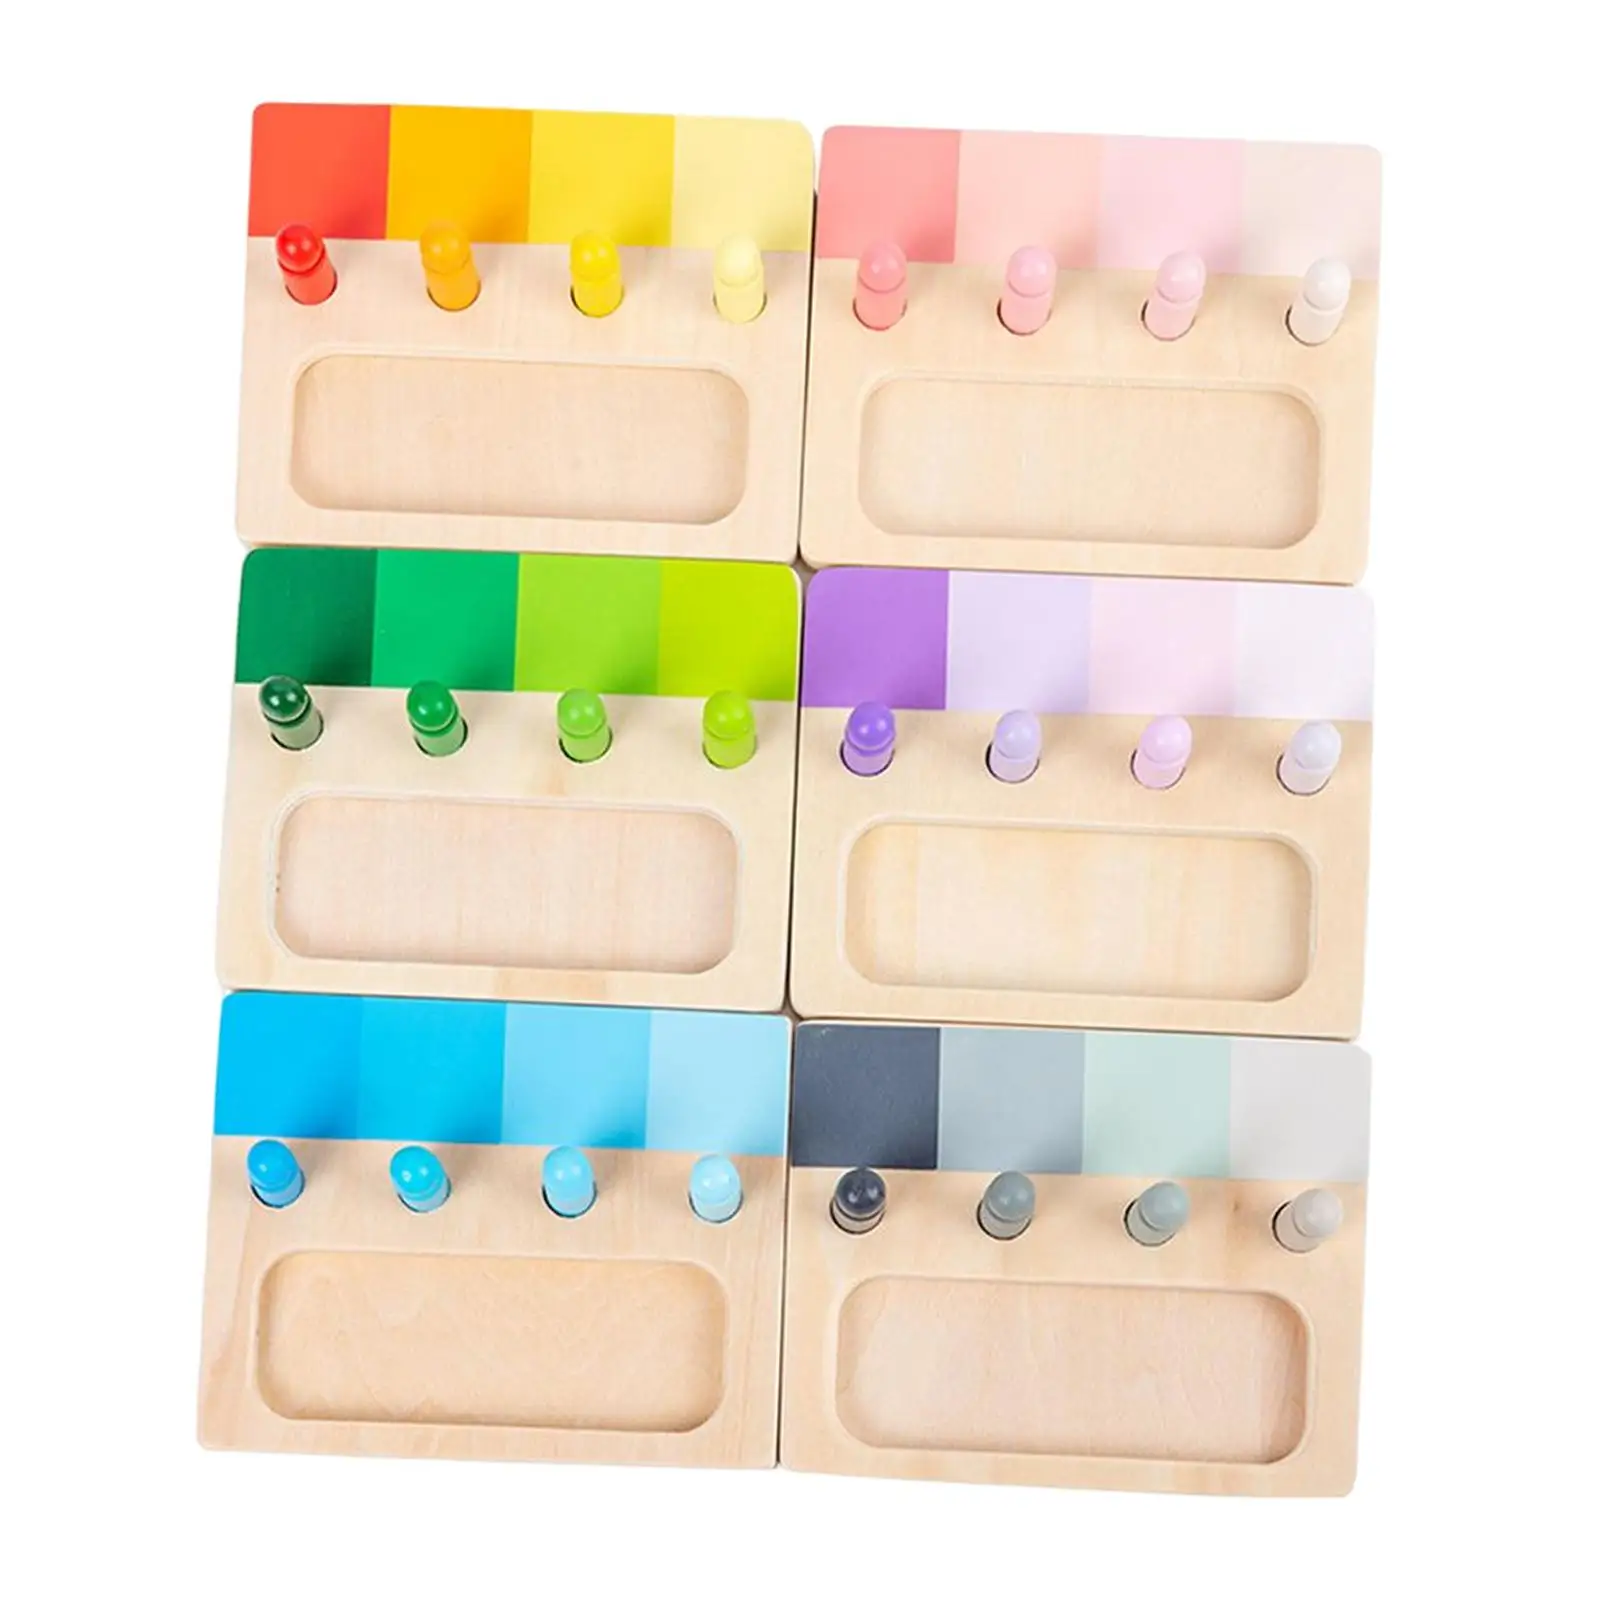 6Pcs Montessori Color palette Sensorial Educational Tools Color Resemblance Sorting Task for Game Teaching Interaction Exercise